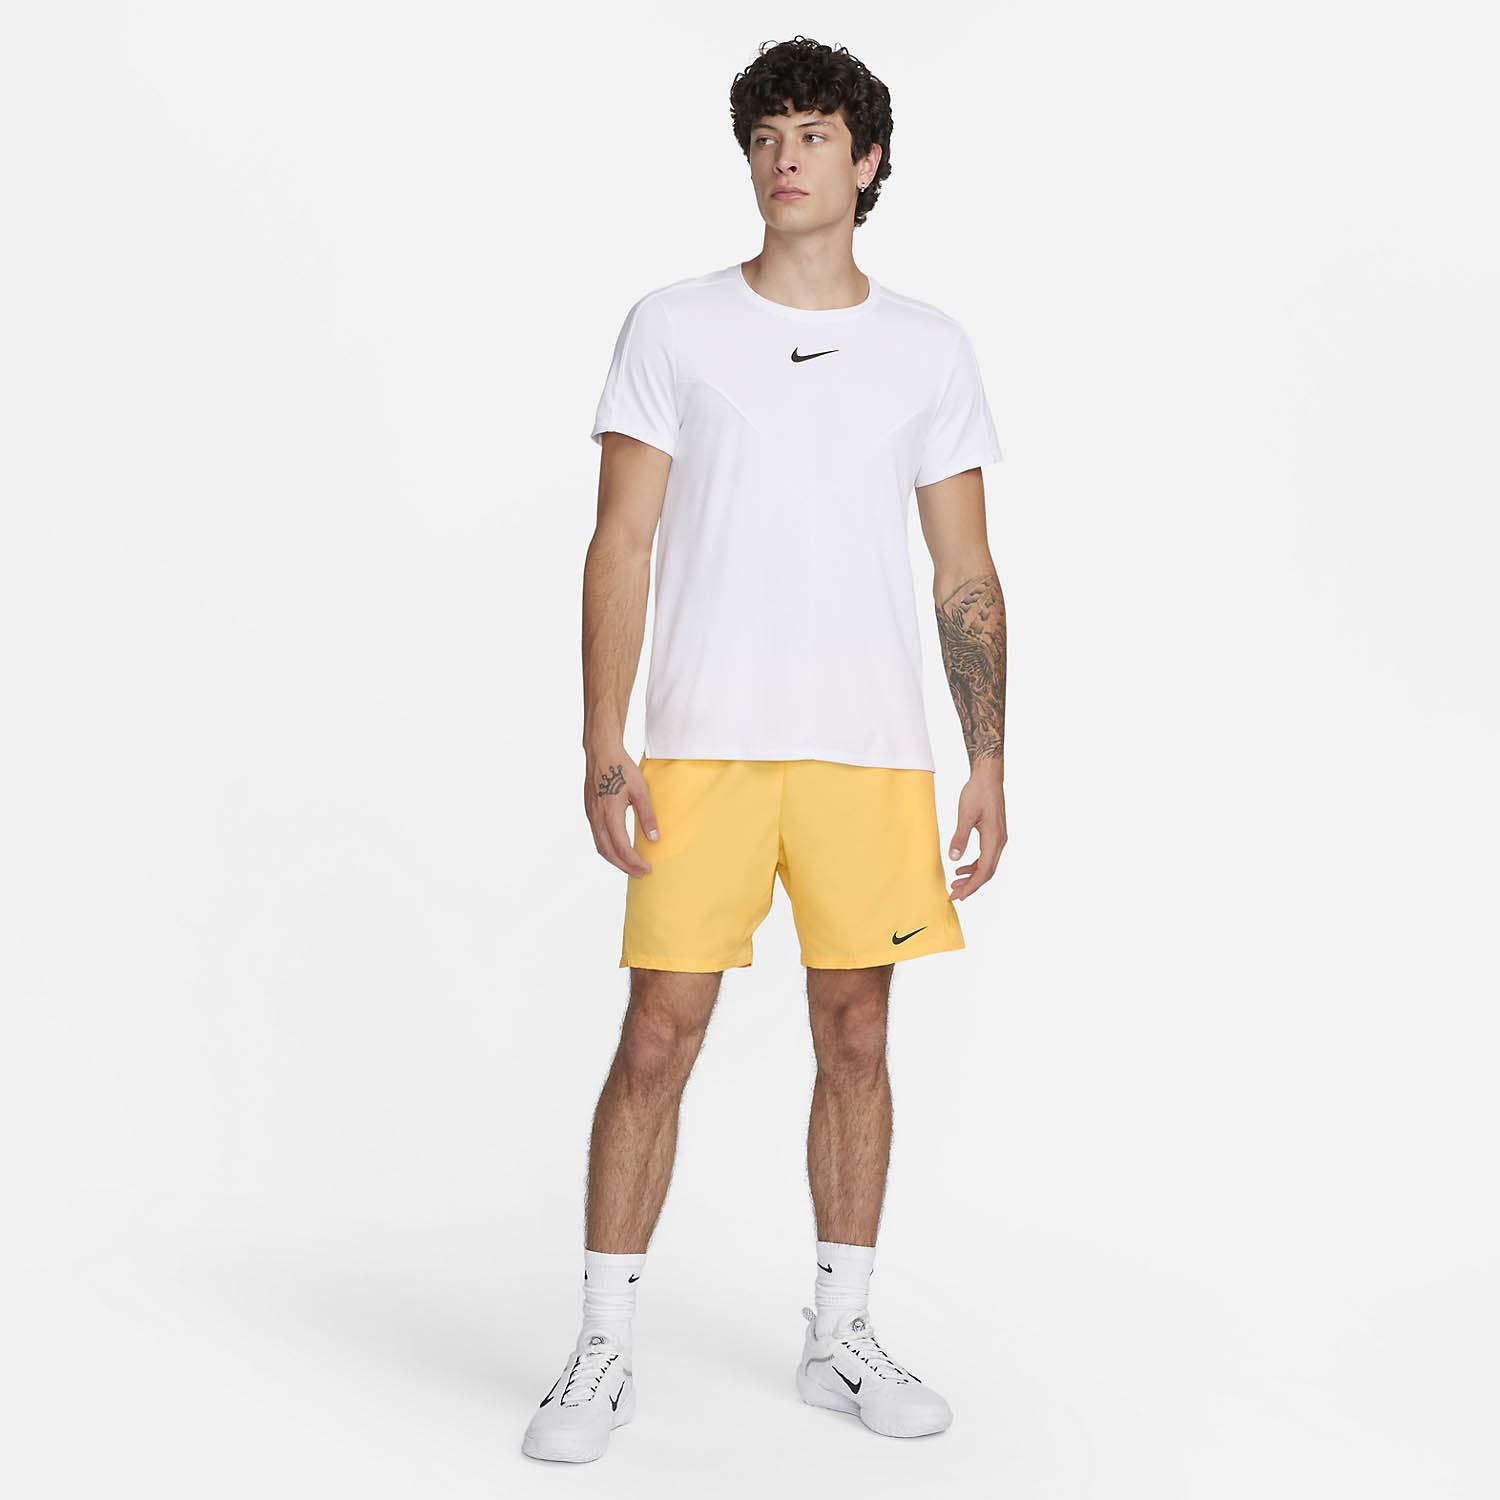 Nike Court Dri-FIT Victory 7in Shorts - Topaz Gold/Black